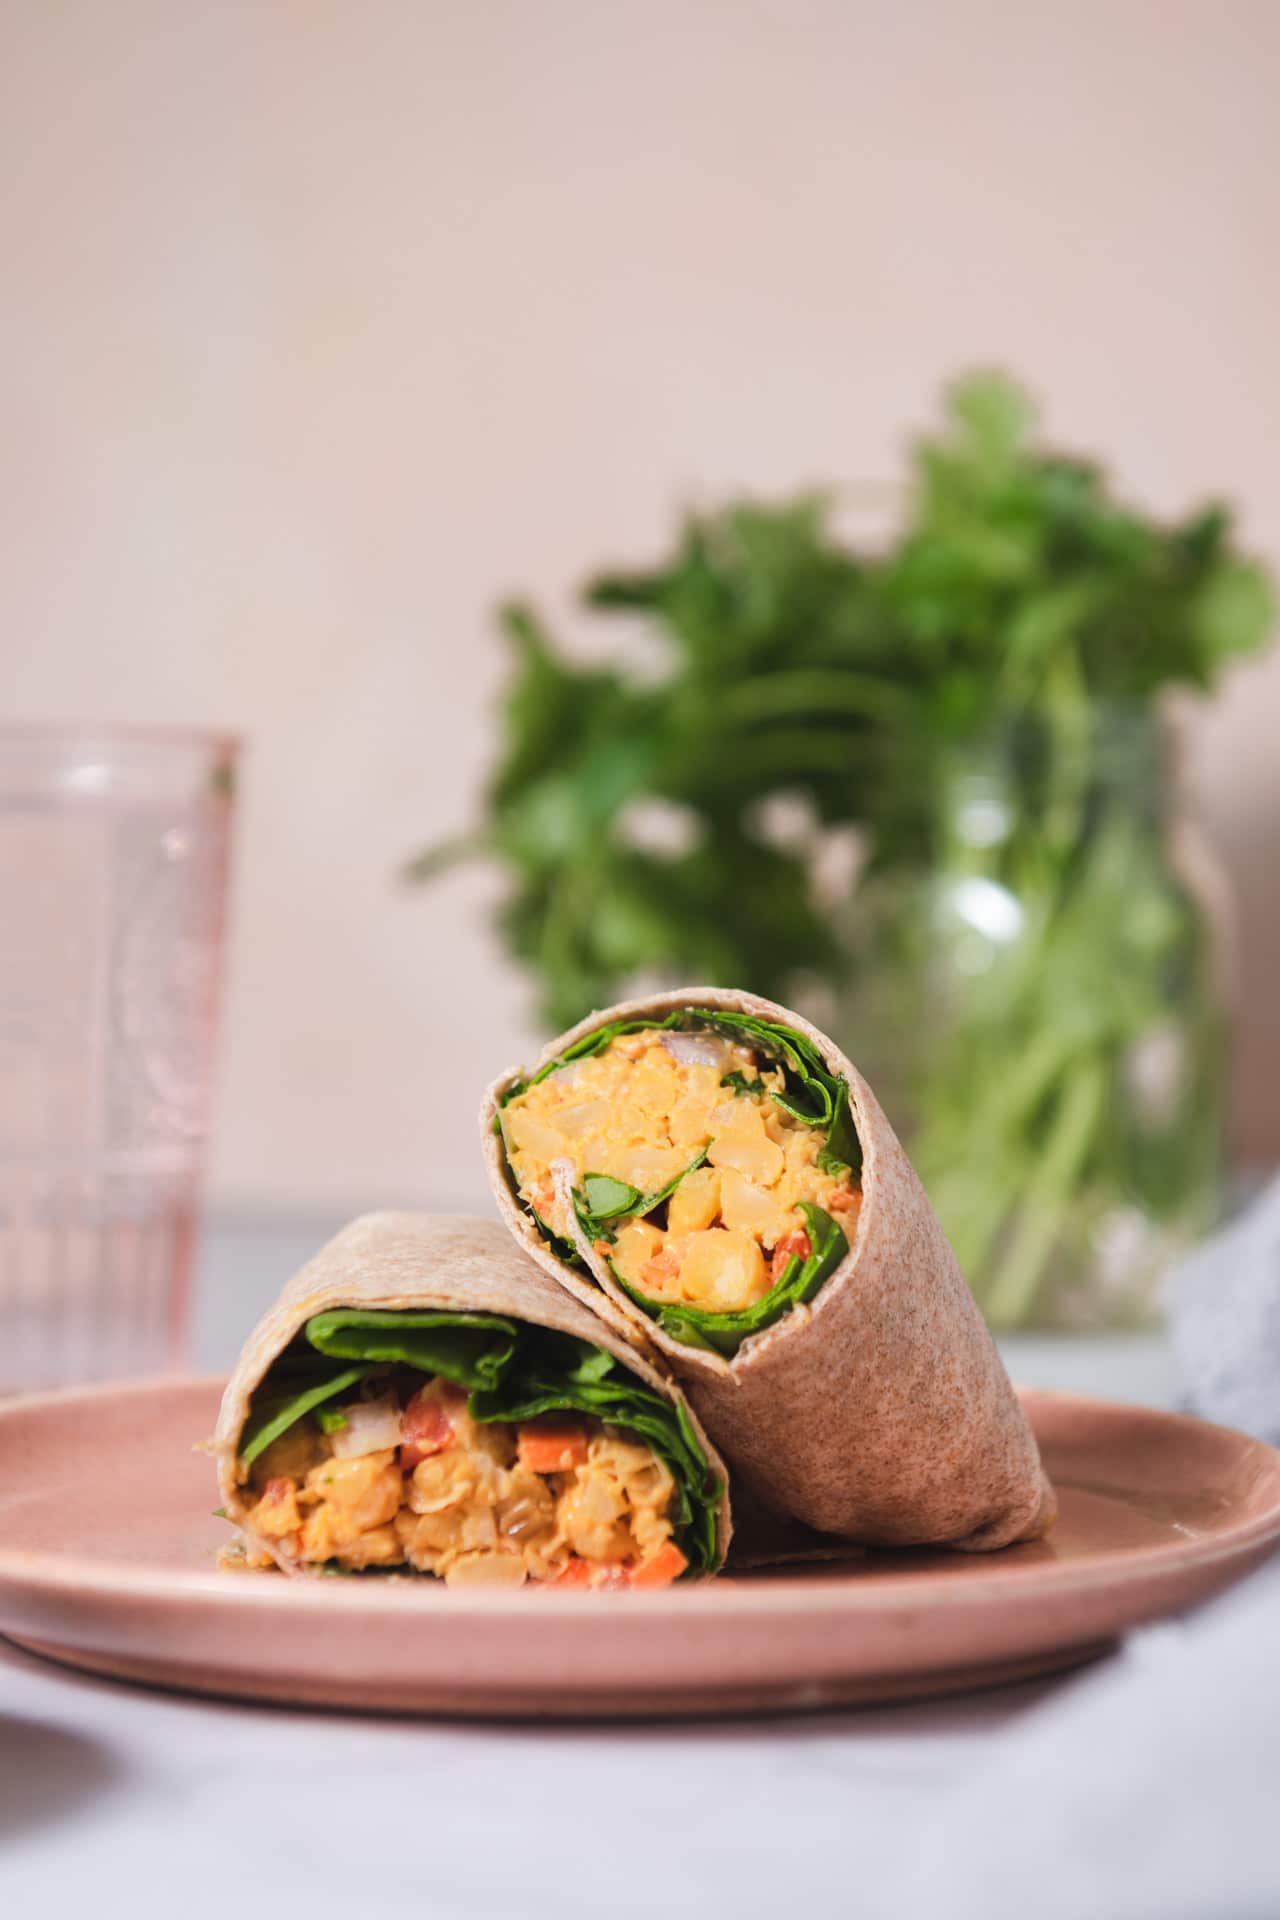 Two halves of a wrap on a pink plate with jar of cilantro in the background